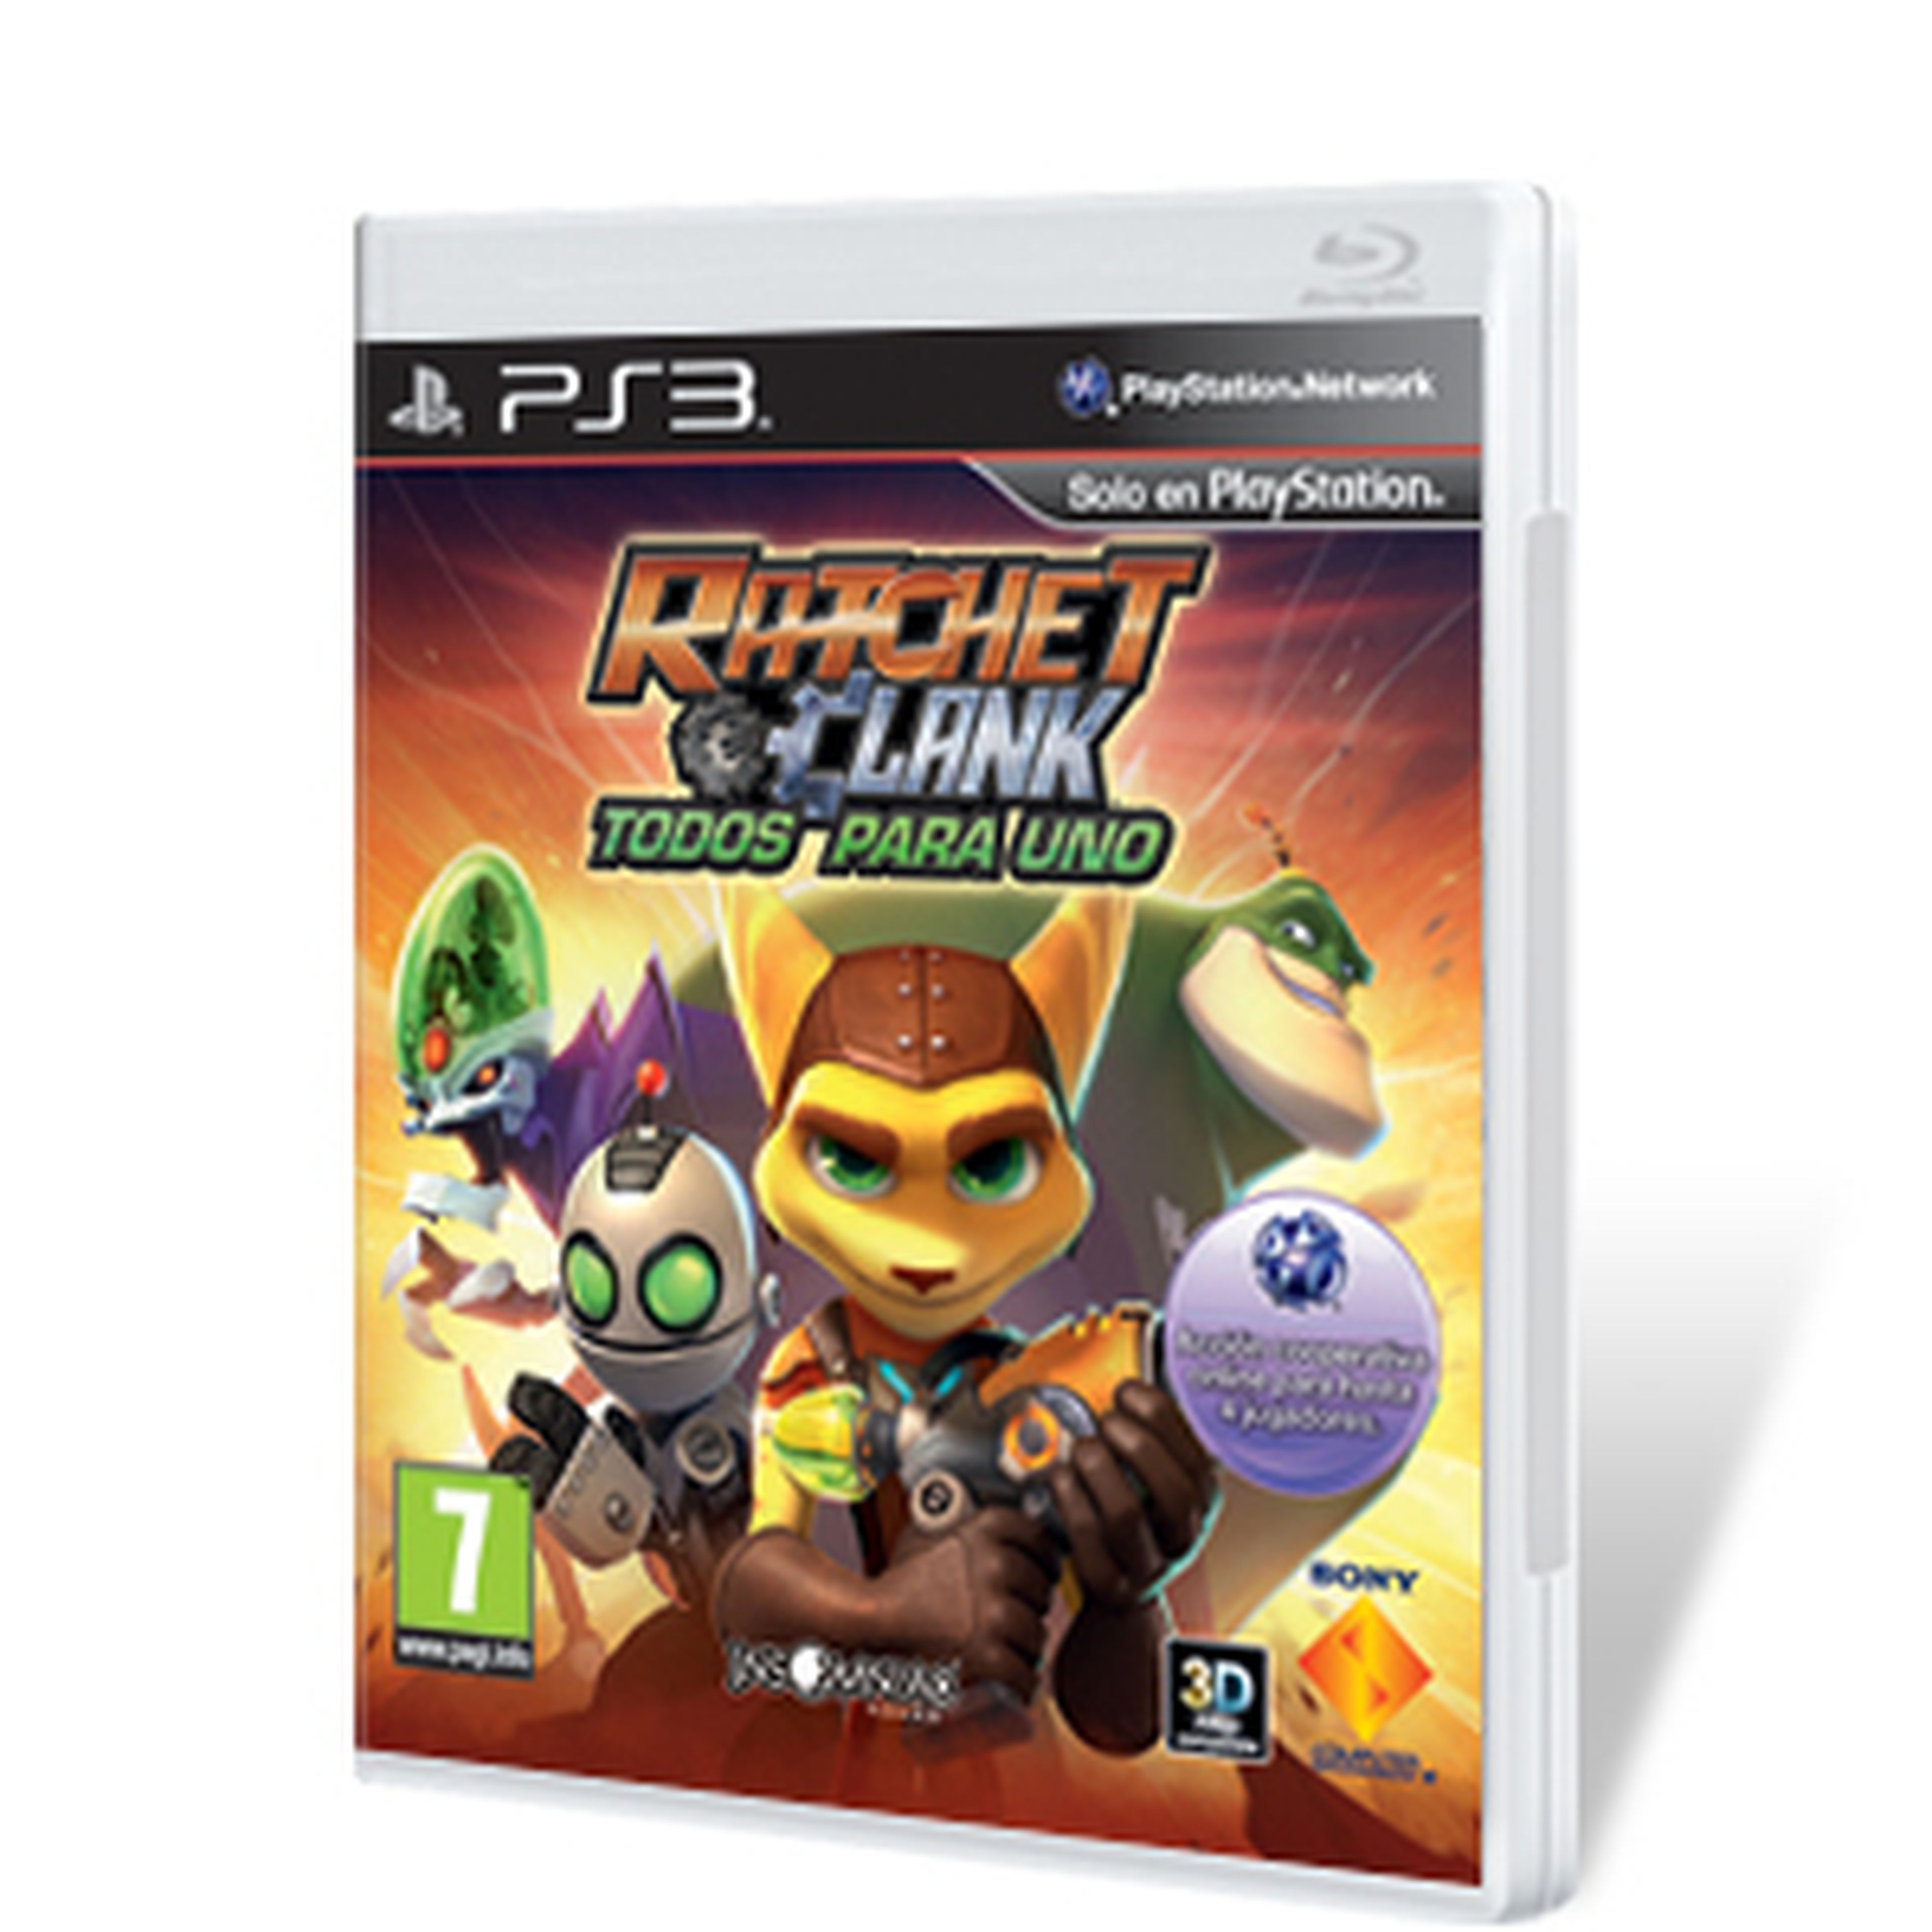 Ratchet & Clank All 4 One para PS3